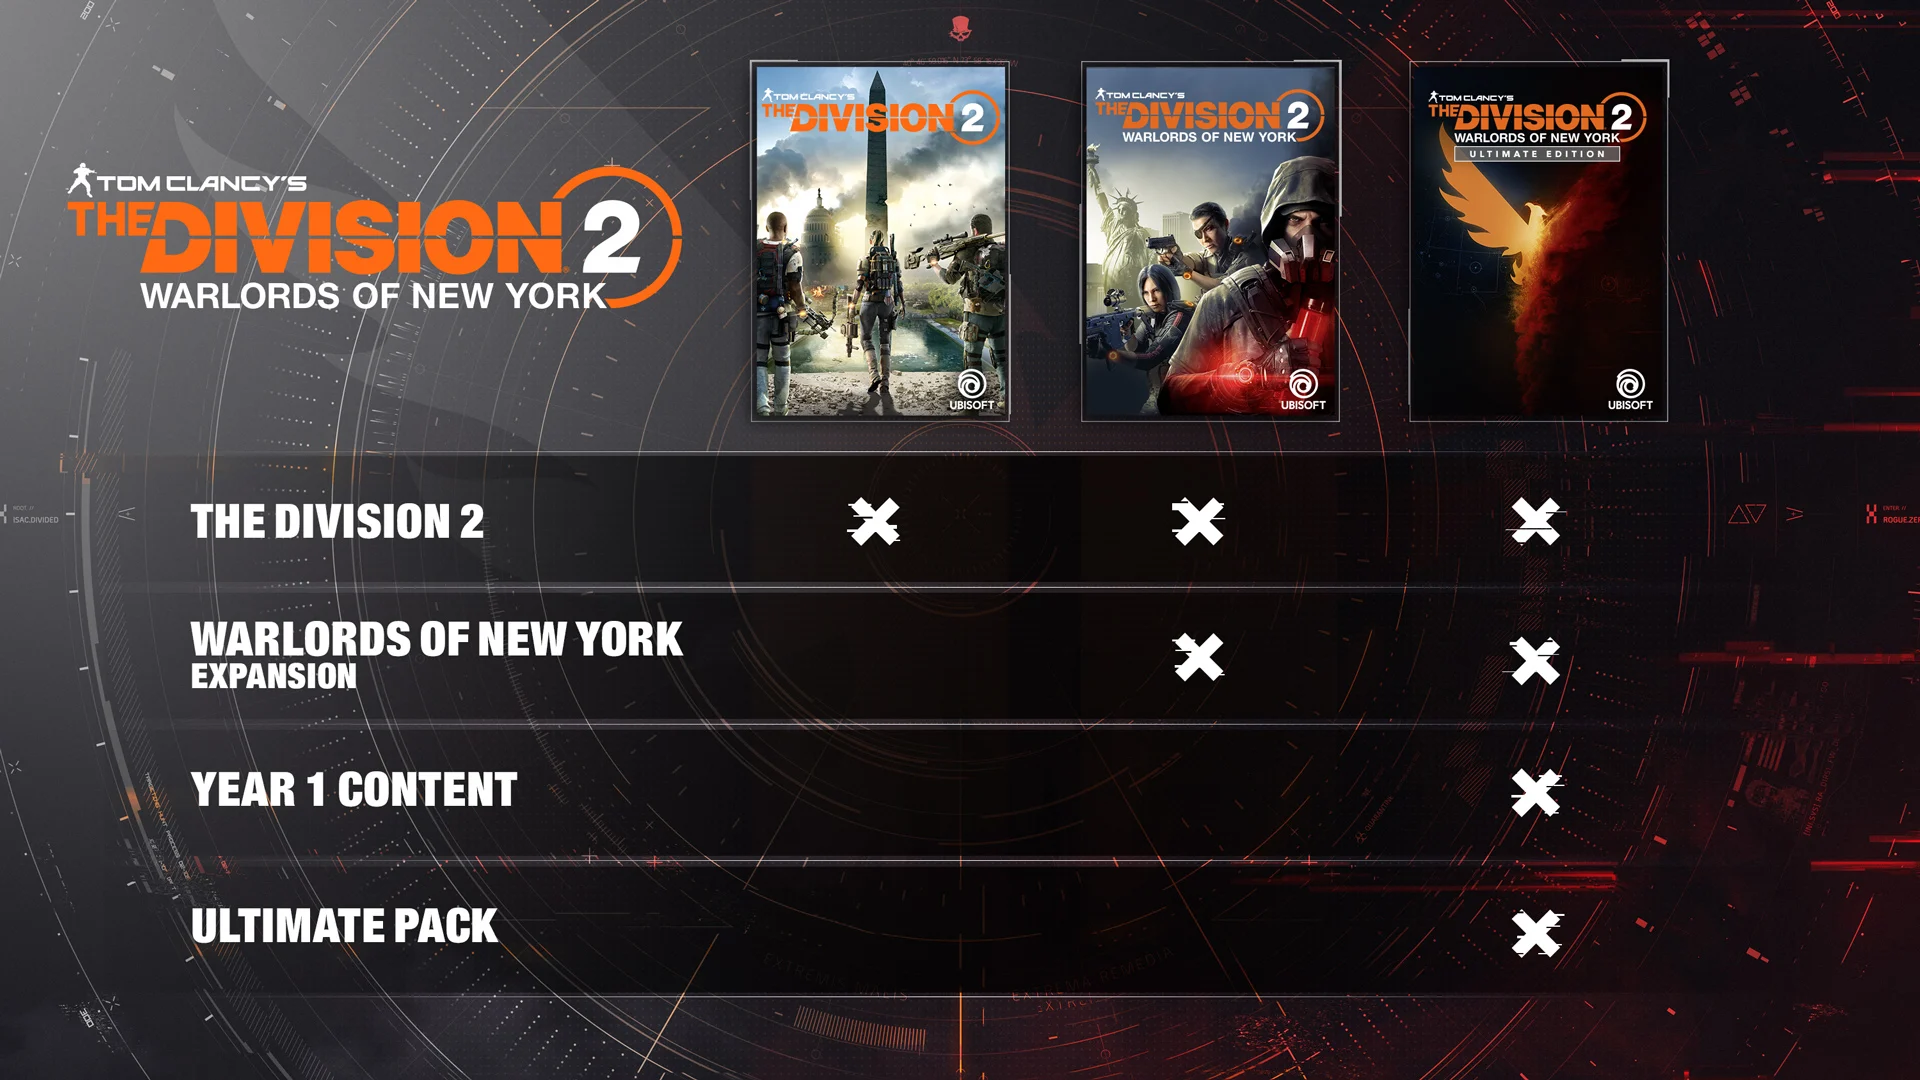 Tom clancy s ultimate edition. Tom Clancy s the Division 2 Воители Нью Йорка. The Division 2 - Warlords of New York - Ultimate Edition. The Division 2 -'Воители Нью-Йорка' – издание Ultimate Edition. Tom Clancy s the Division 2 дополнения.